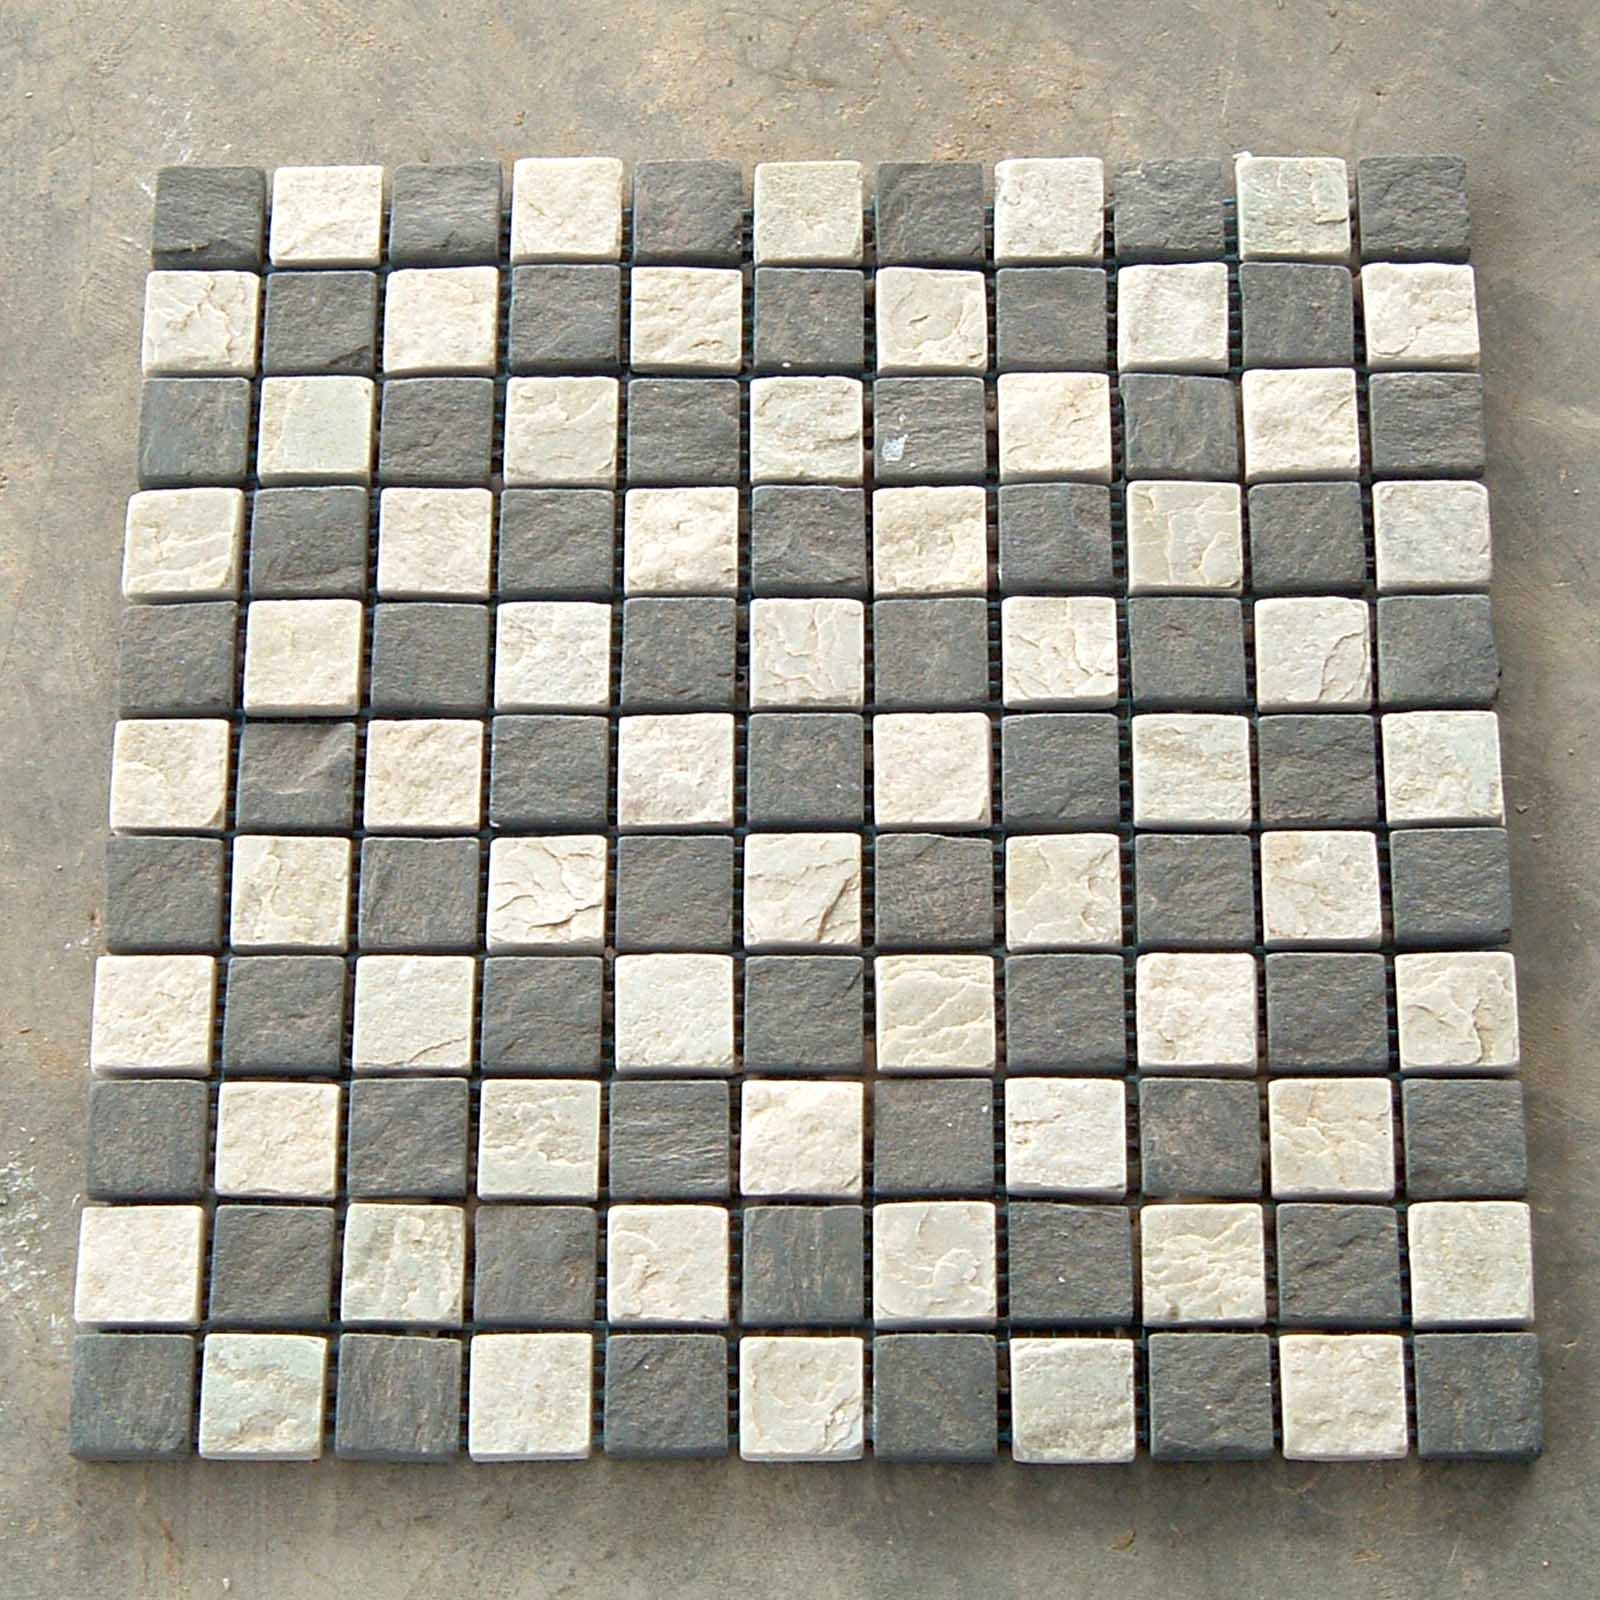 Mosaic Tiles South Indian From Indian Exporter And Supplier